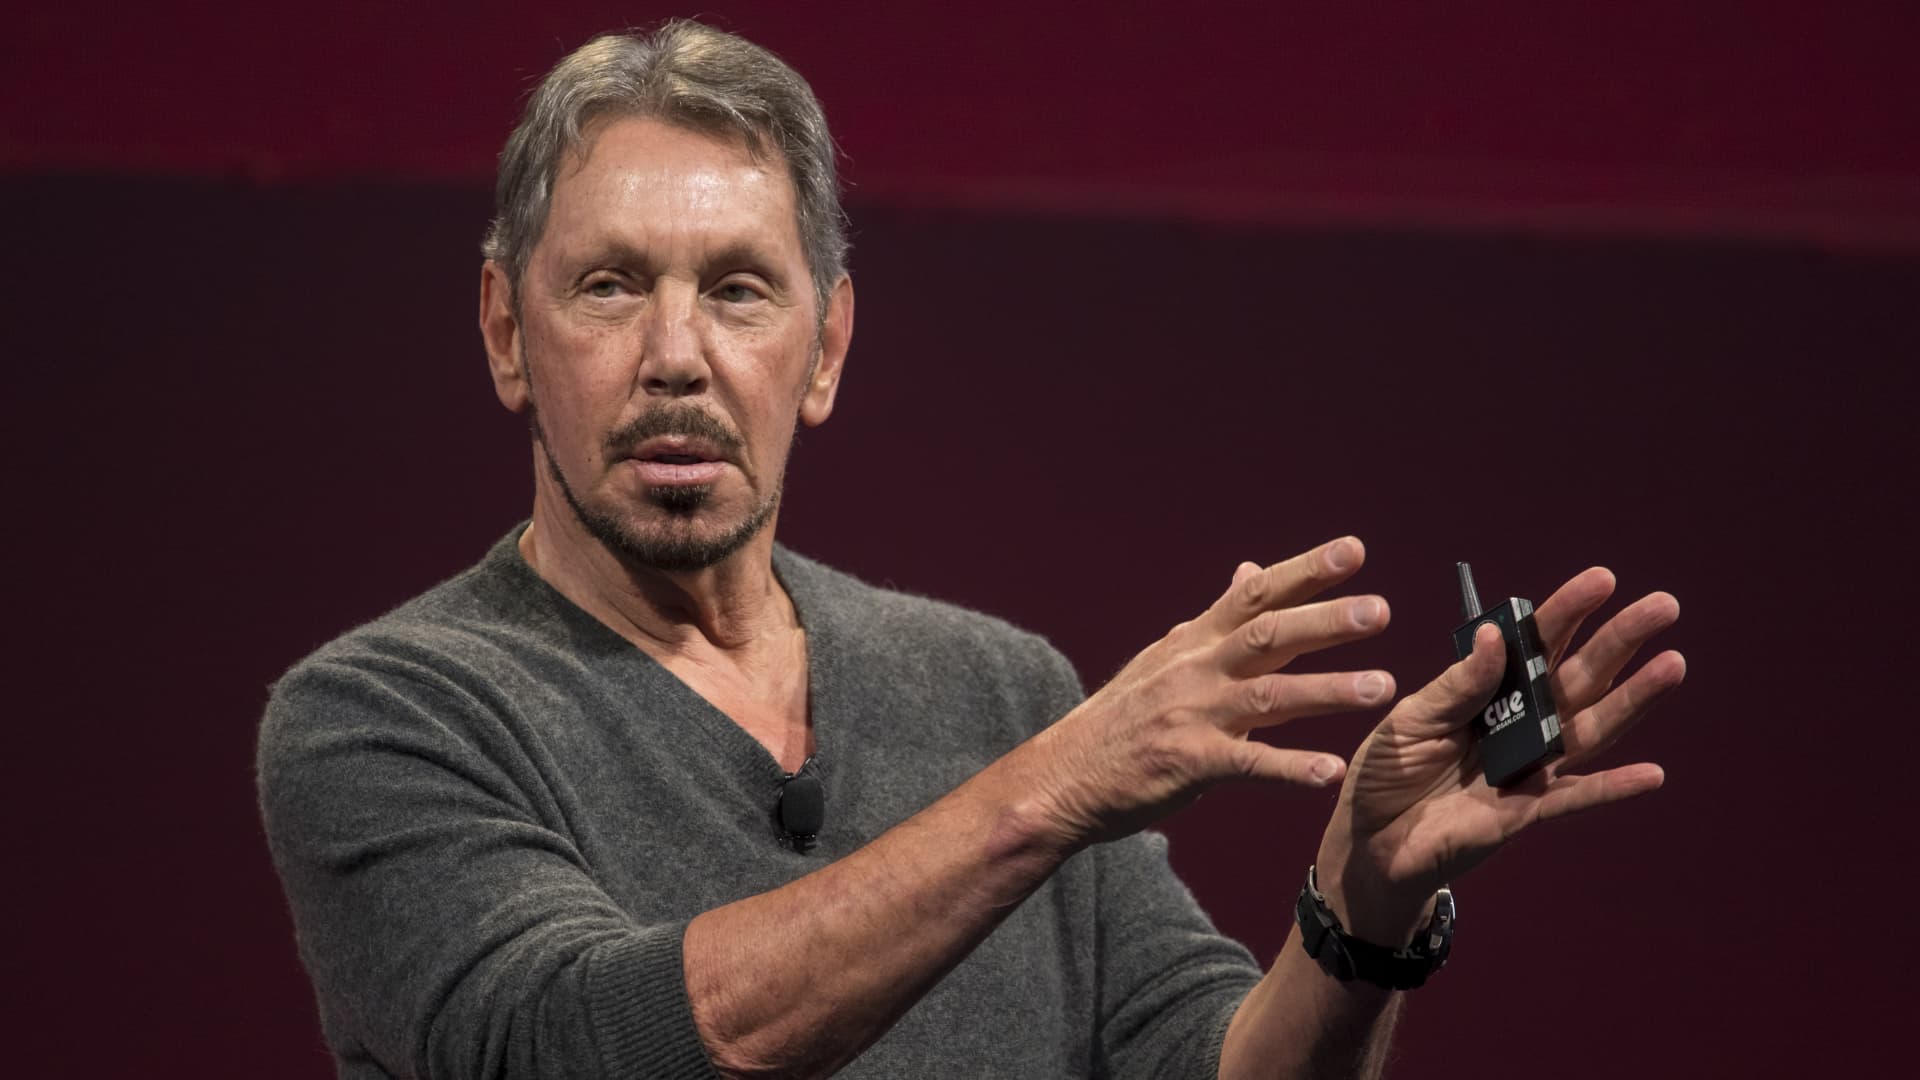 Larry Ellison, co-founder and chairman of Oracle, speaks during the Oracle OpenWorld 2017 conference